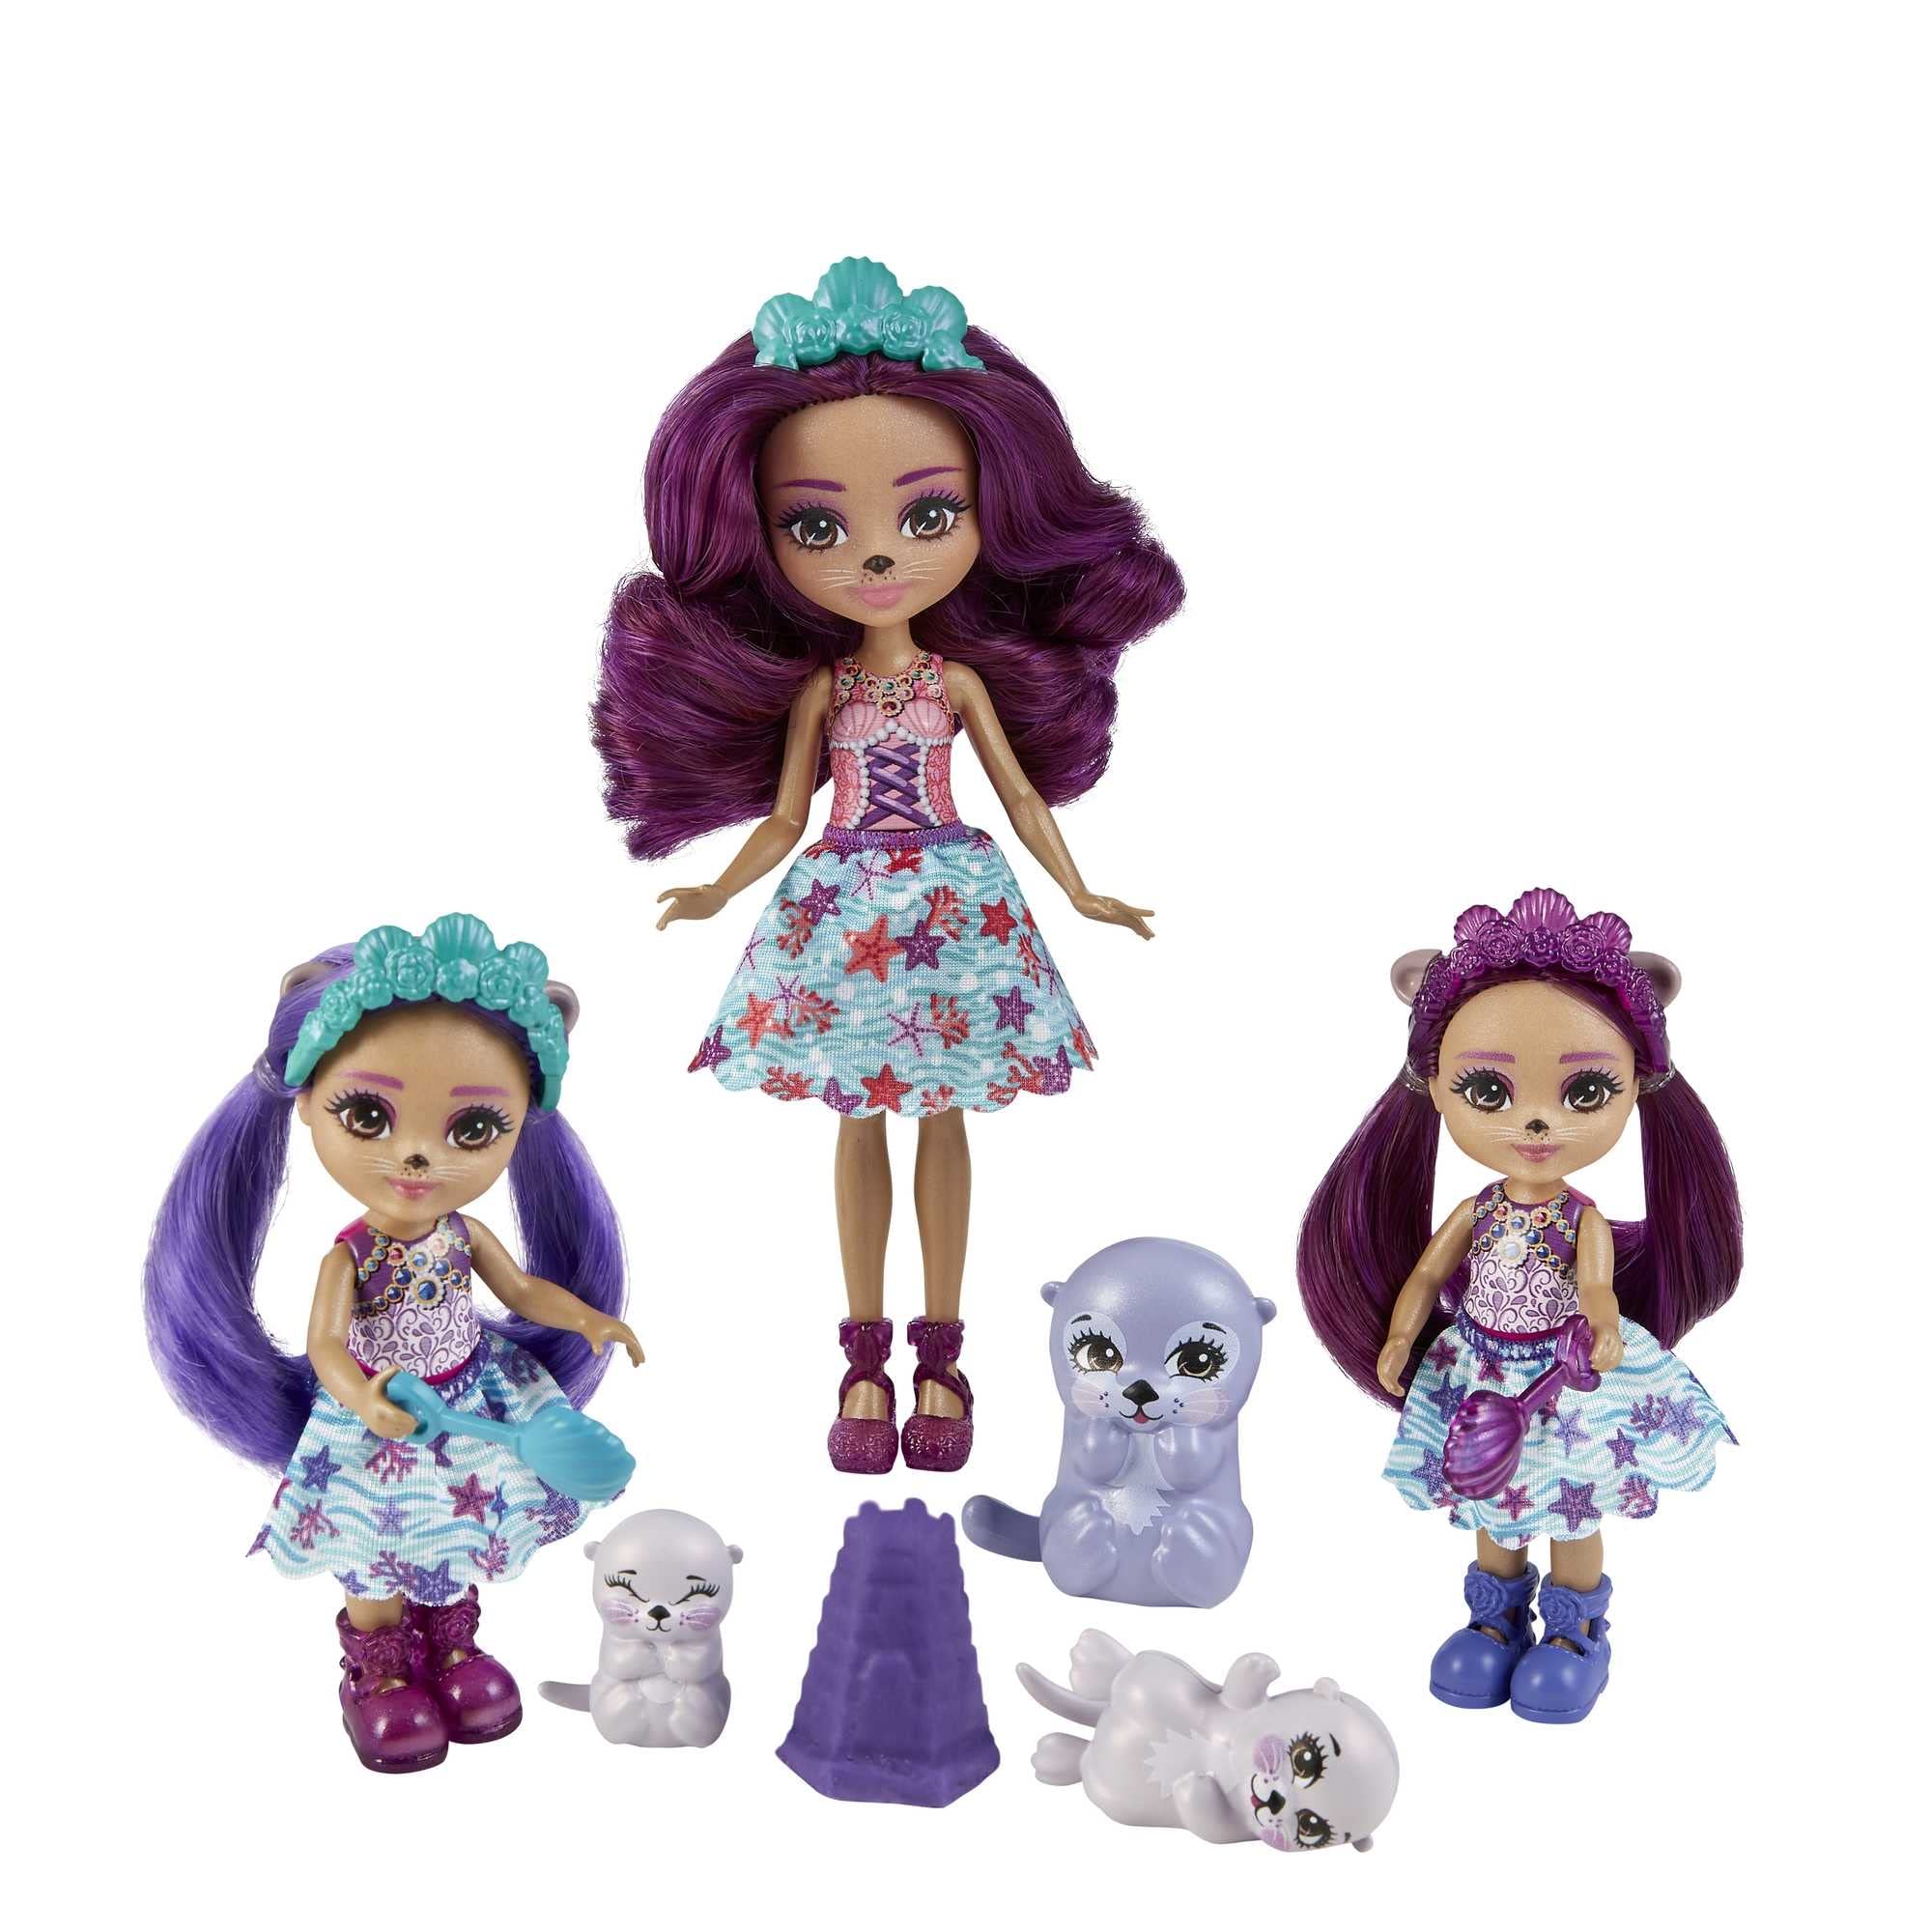 Enchantimals Family Toy Set, Ottavia Otter Doll (6-in) with Little Sibling Dolls (4-in) and 3 Otter Animal Figures, Great Gift for Kids Ages 3 and Up